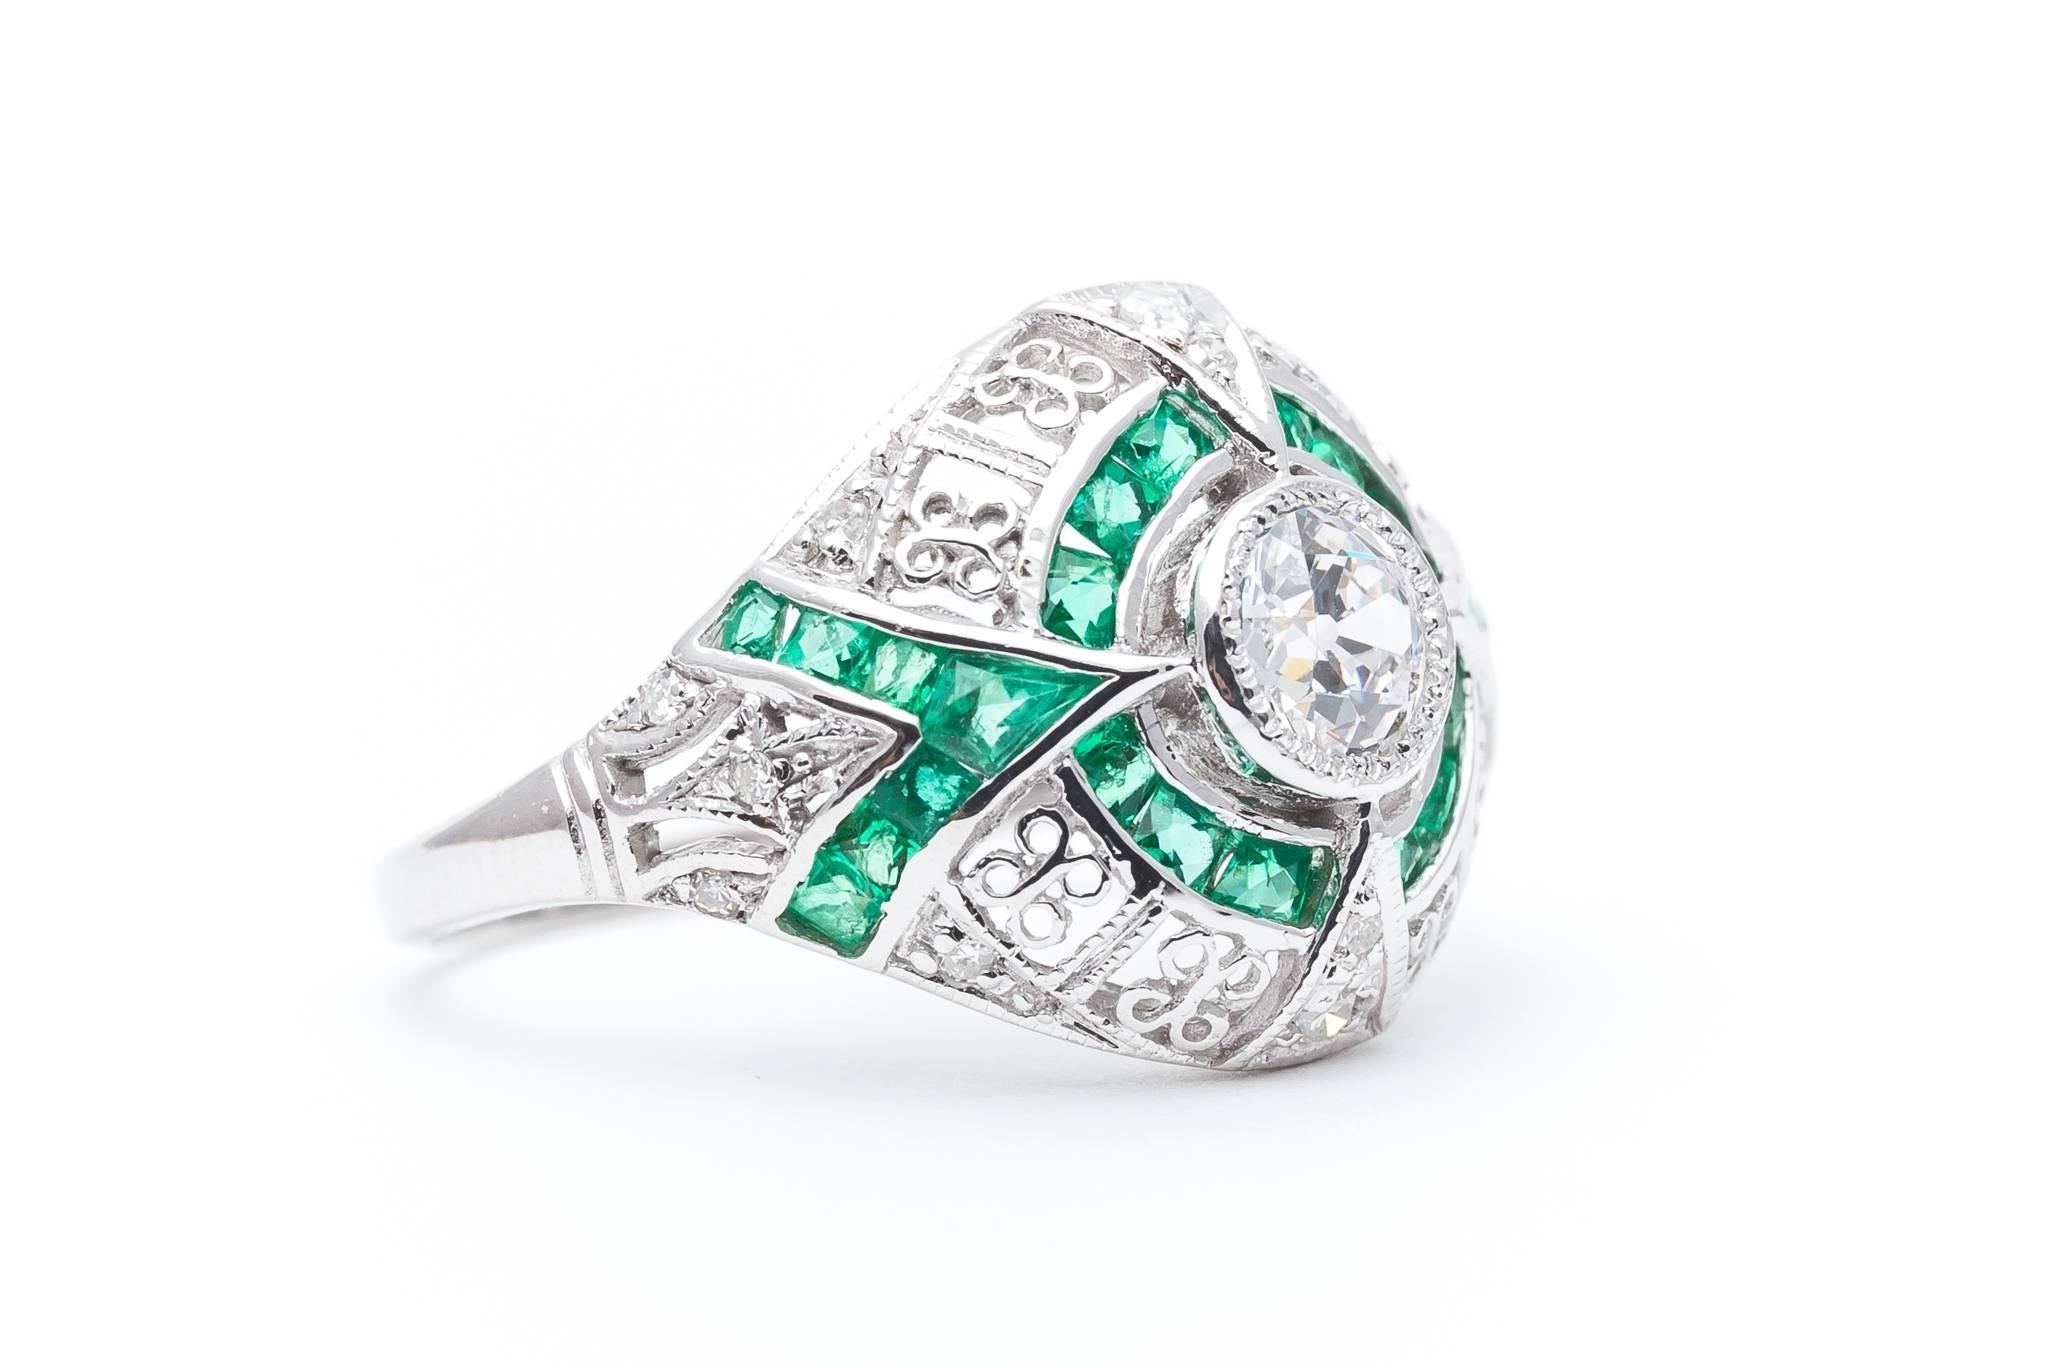 A stunning emerald and diamond engagement ring in 14 karat white gold. Centered by a sparkling antique European cut diamond of 0.60 carats, this stunning ring is set throughout with hand French cut emeralds, and sparkling antique cut diamonds all in